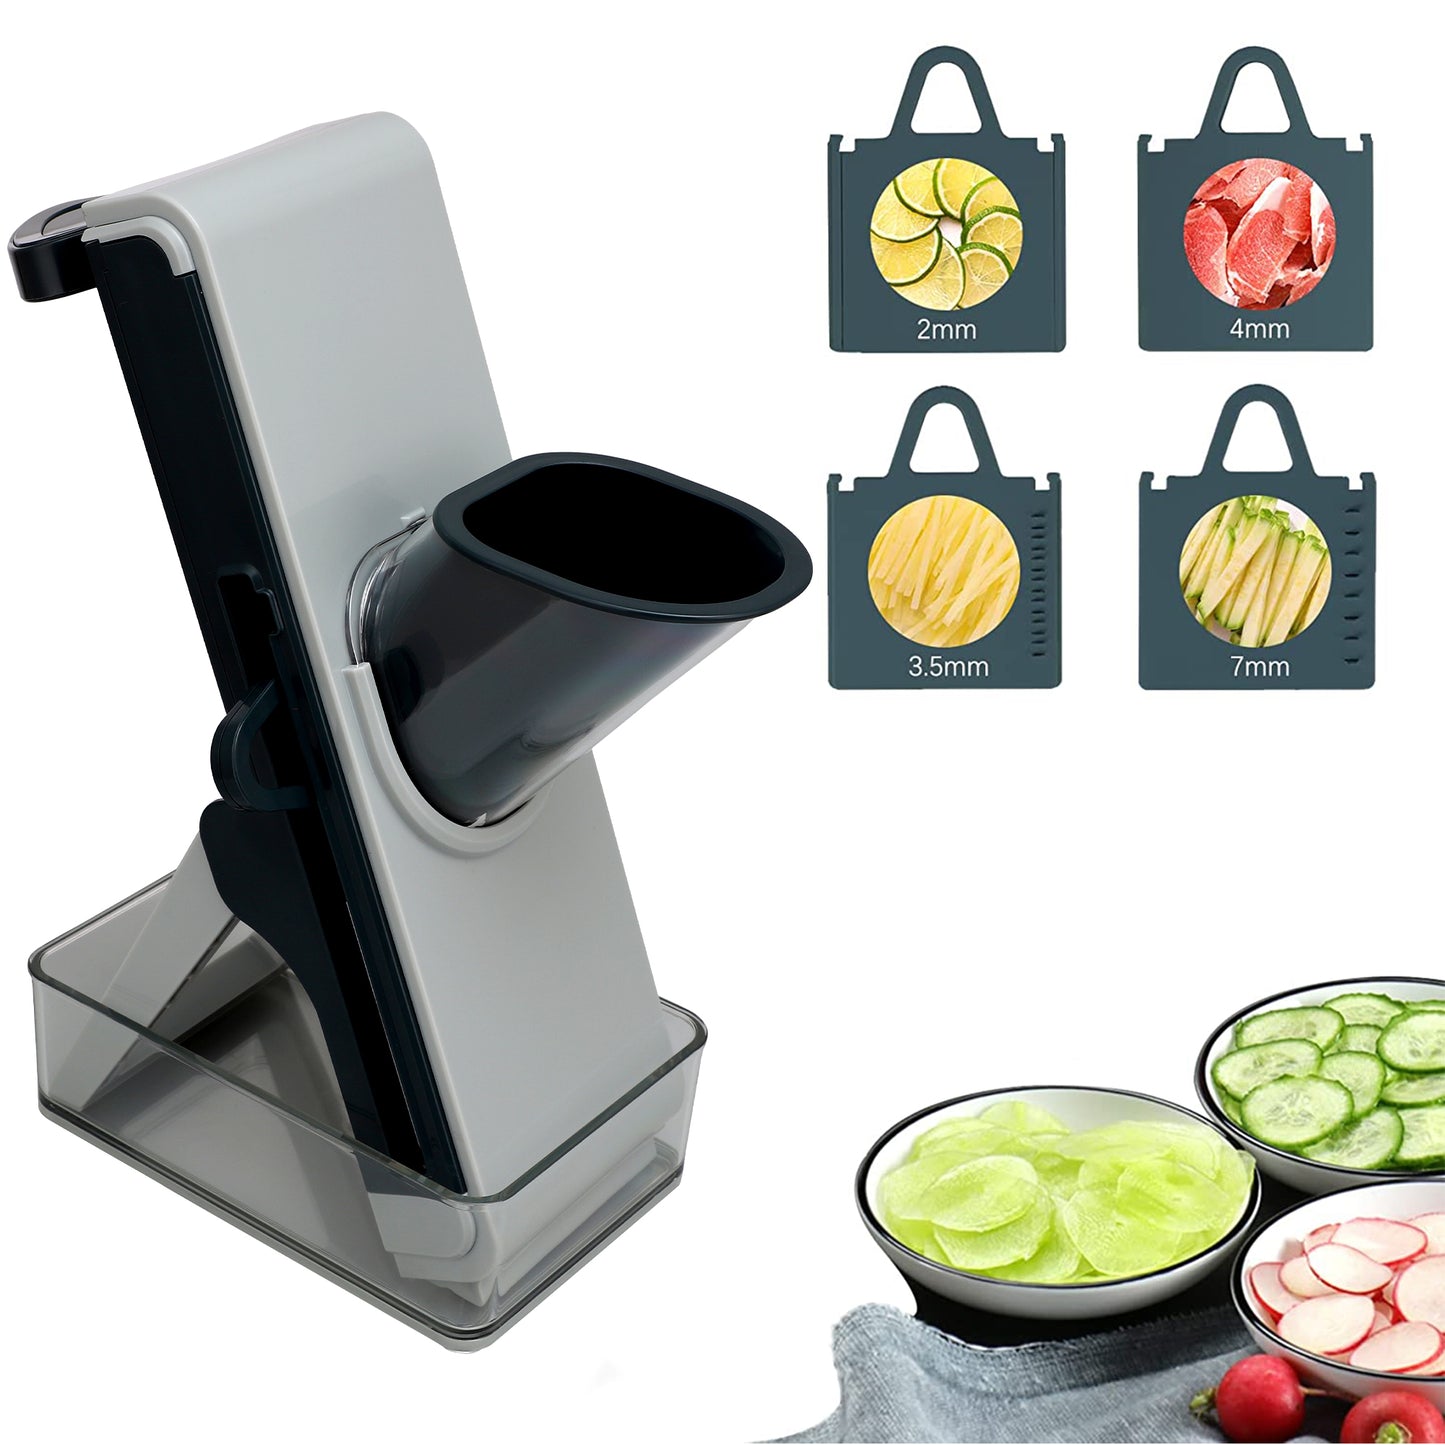 Mandoline Slicer for Kitchen, Chopping Artifact, Vegetable Slicer Cutter, Food Slice and Julienne for Potatoes, Onions, Cucumbers, Carrots, Fruits, Veggie Chopper for Vegetables Meal Prep, Blue